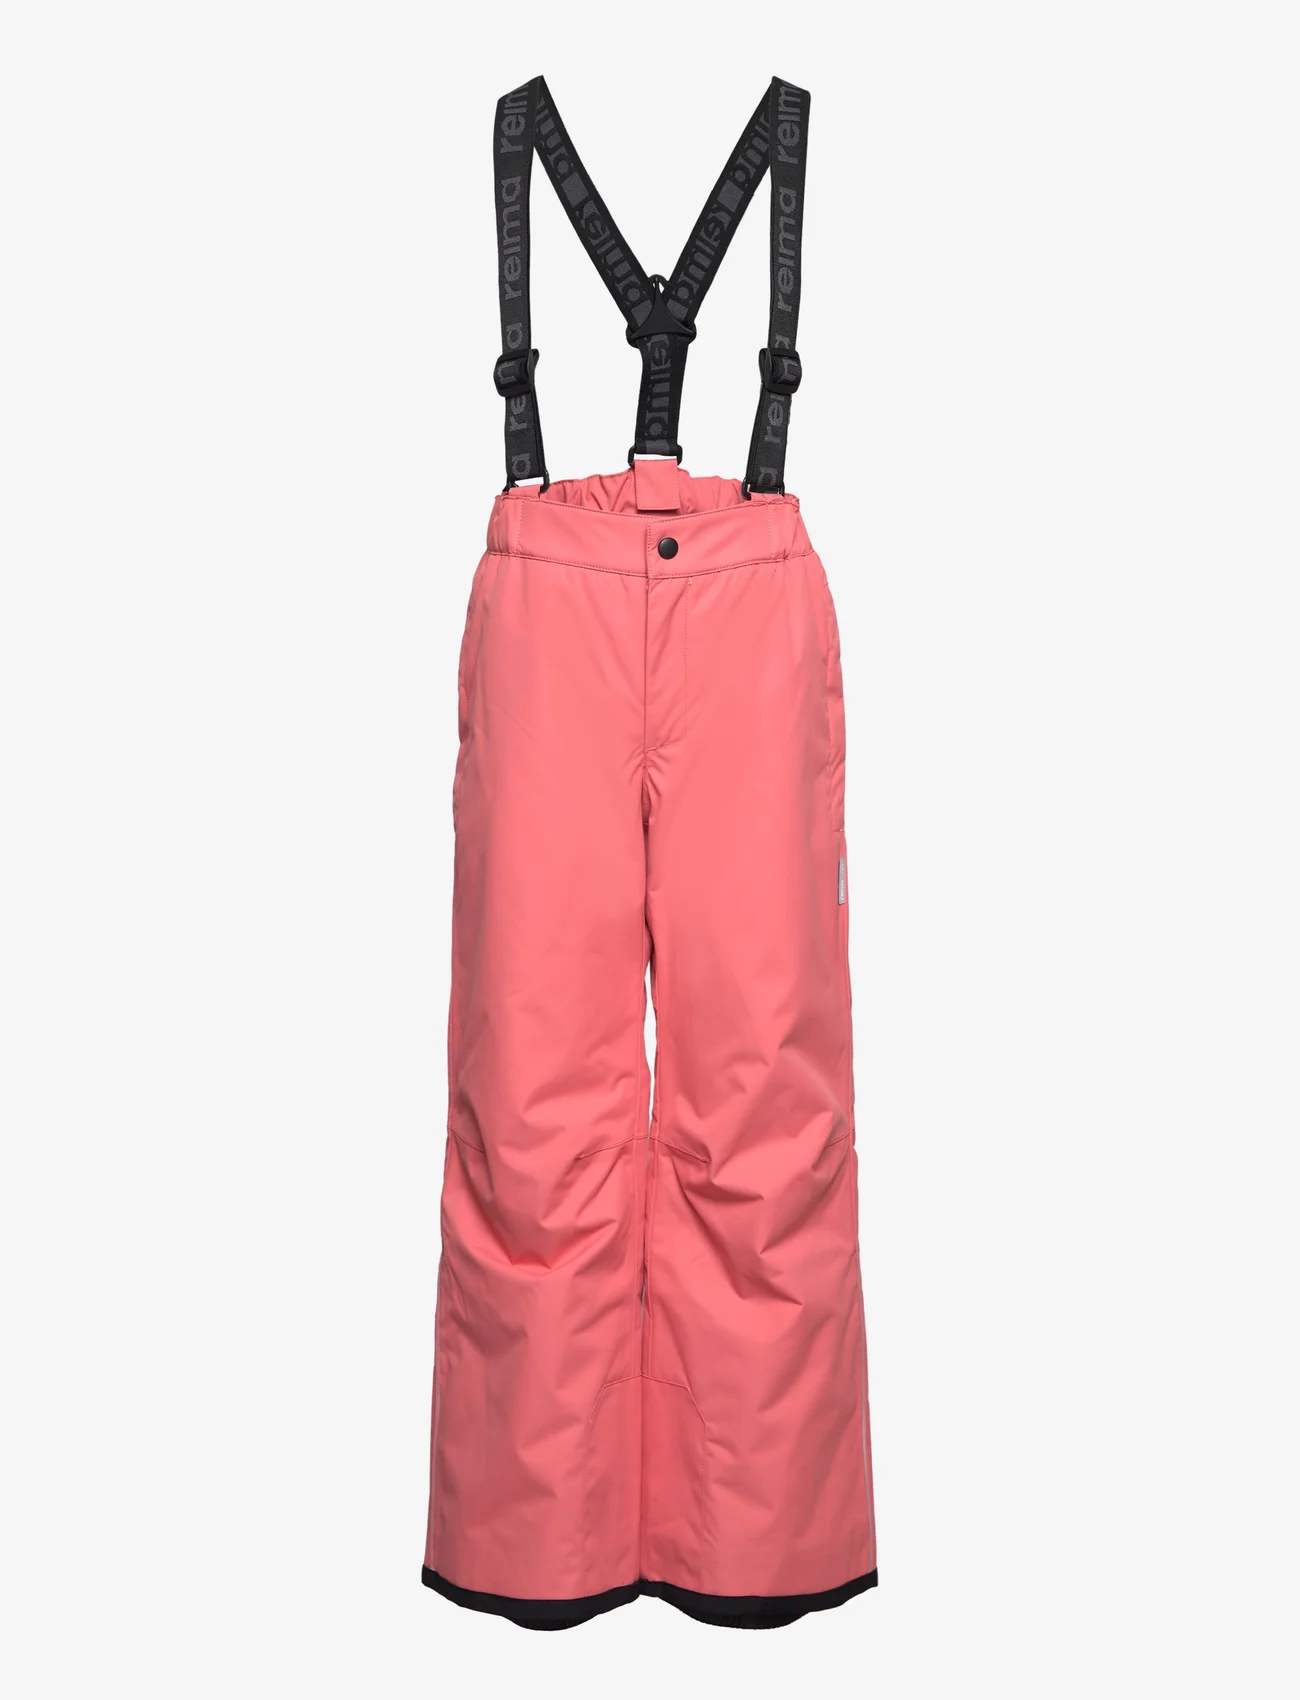 Reima - Kids' winter trousers Proxima - doły - pink coral - 0